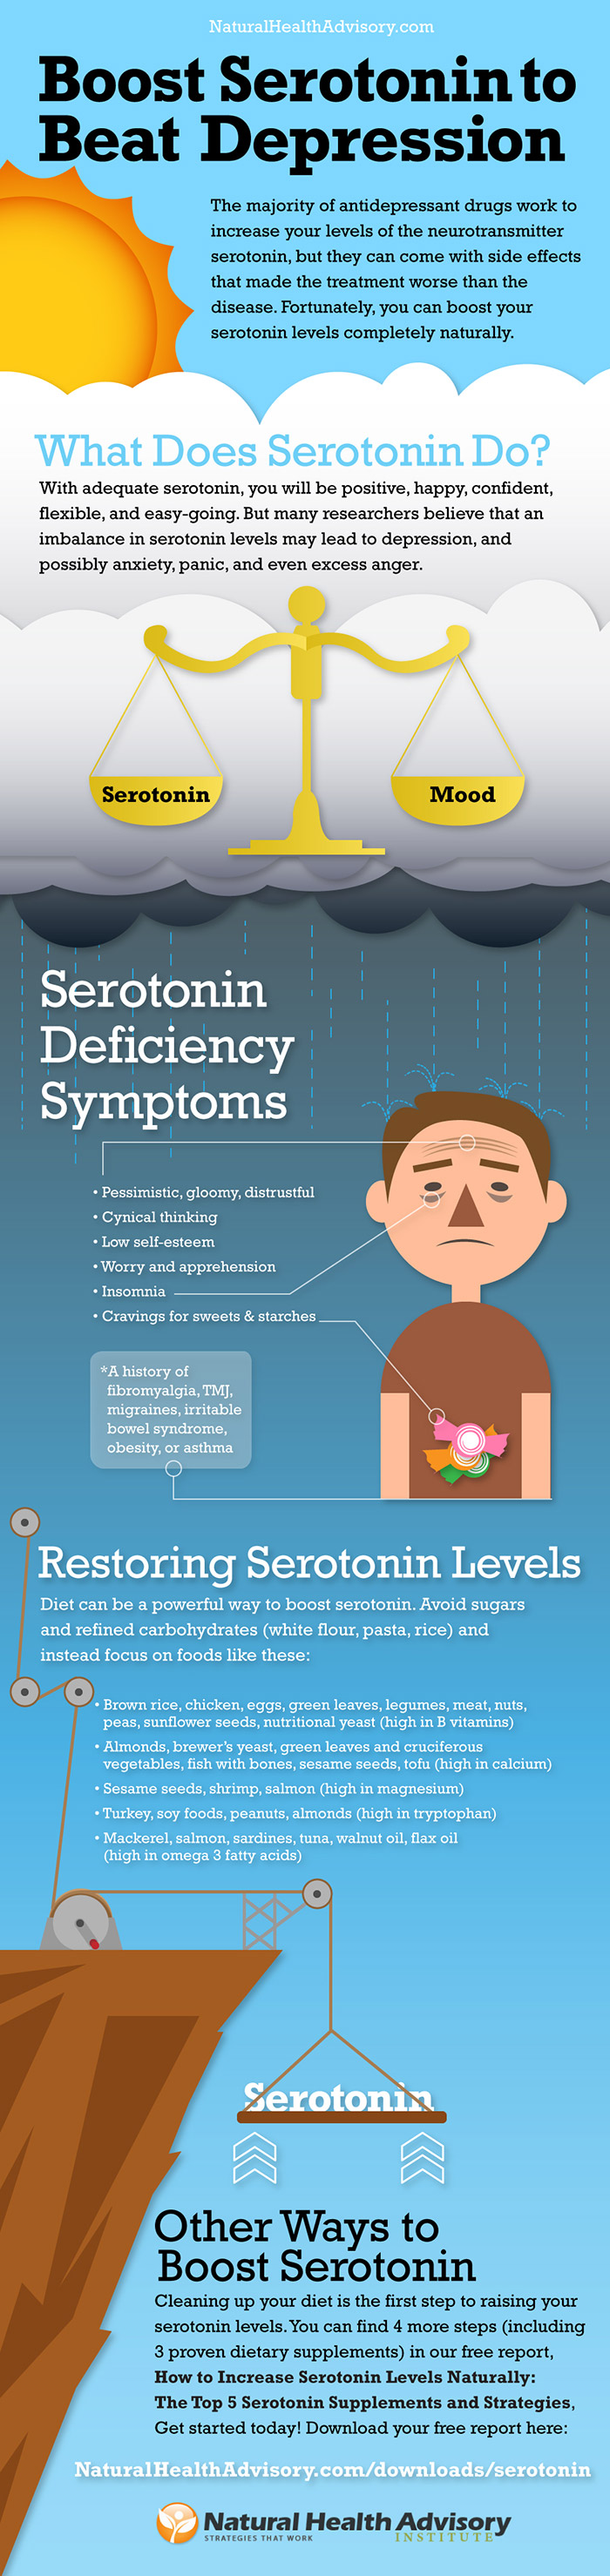 How to Boost Serotonin to Beat Depression